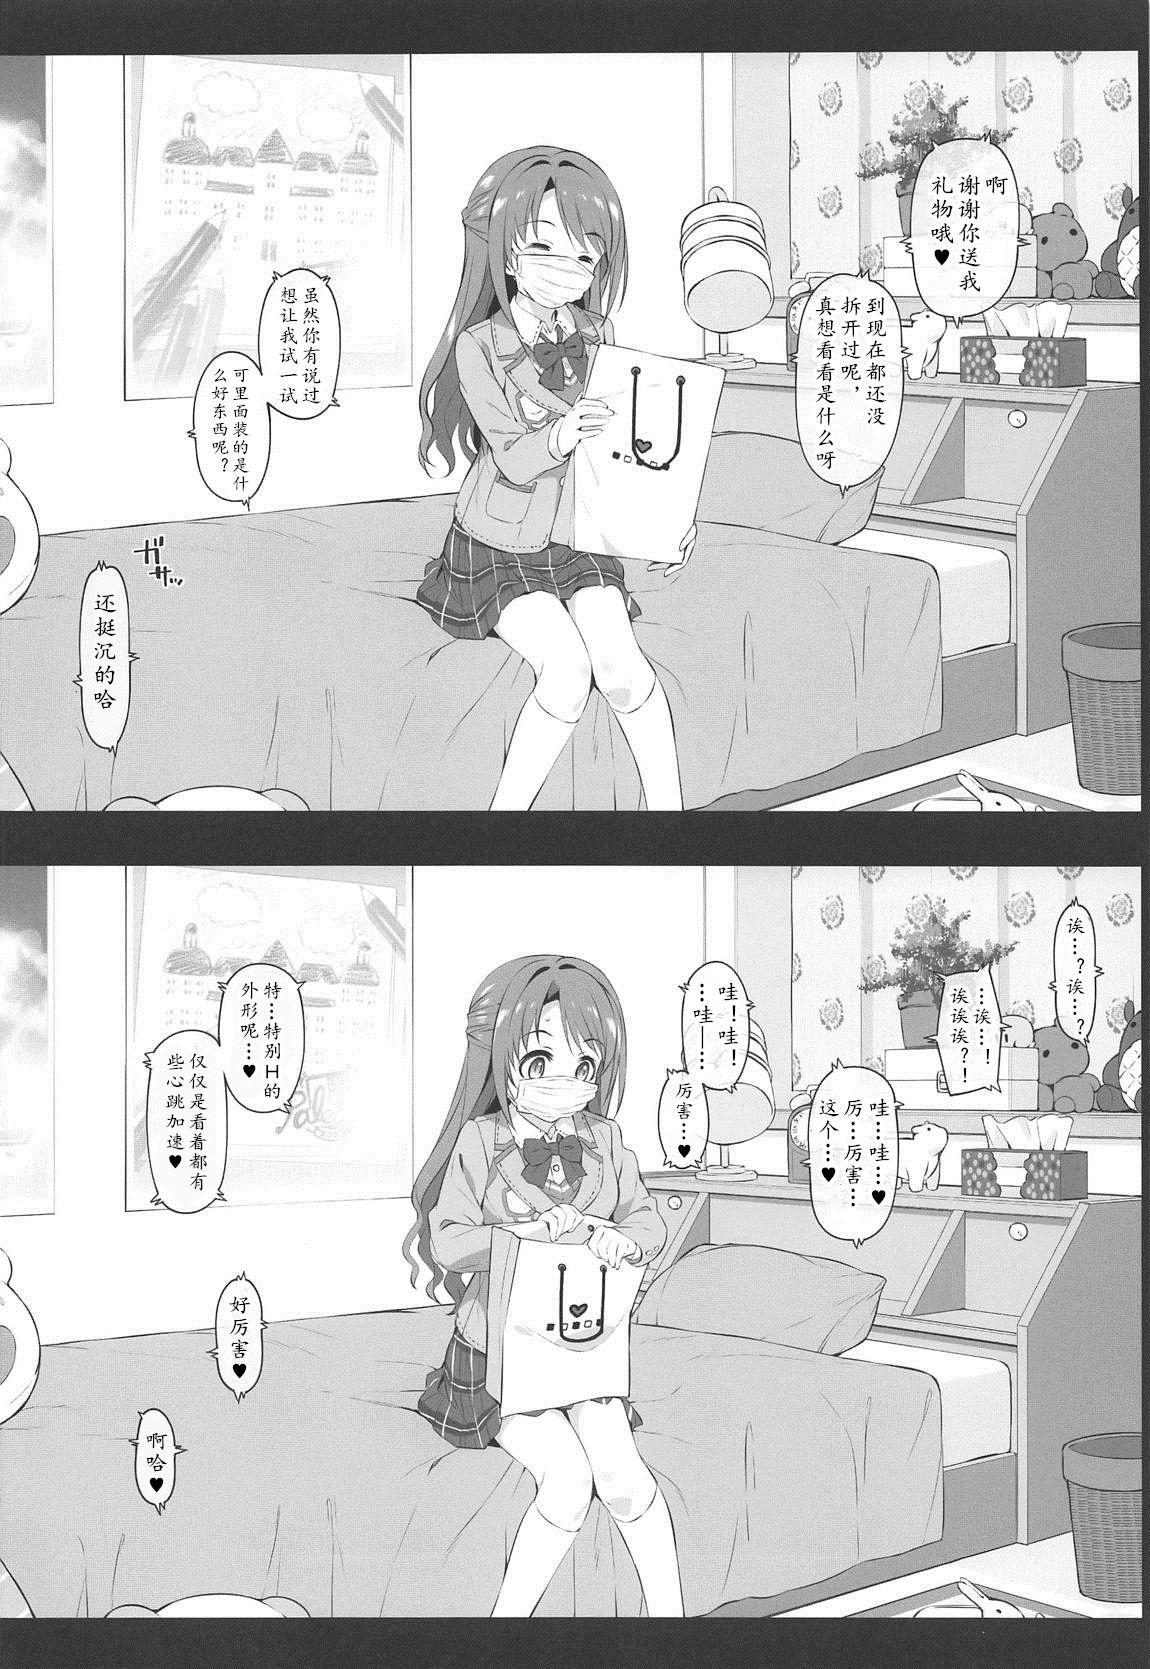 Stripping Let's bring a smile to you with a love letter. - The idolmaster Cuck - Page 6